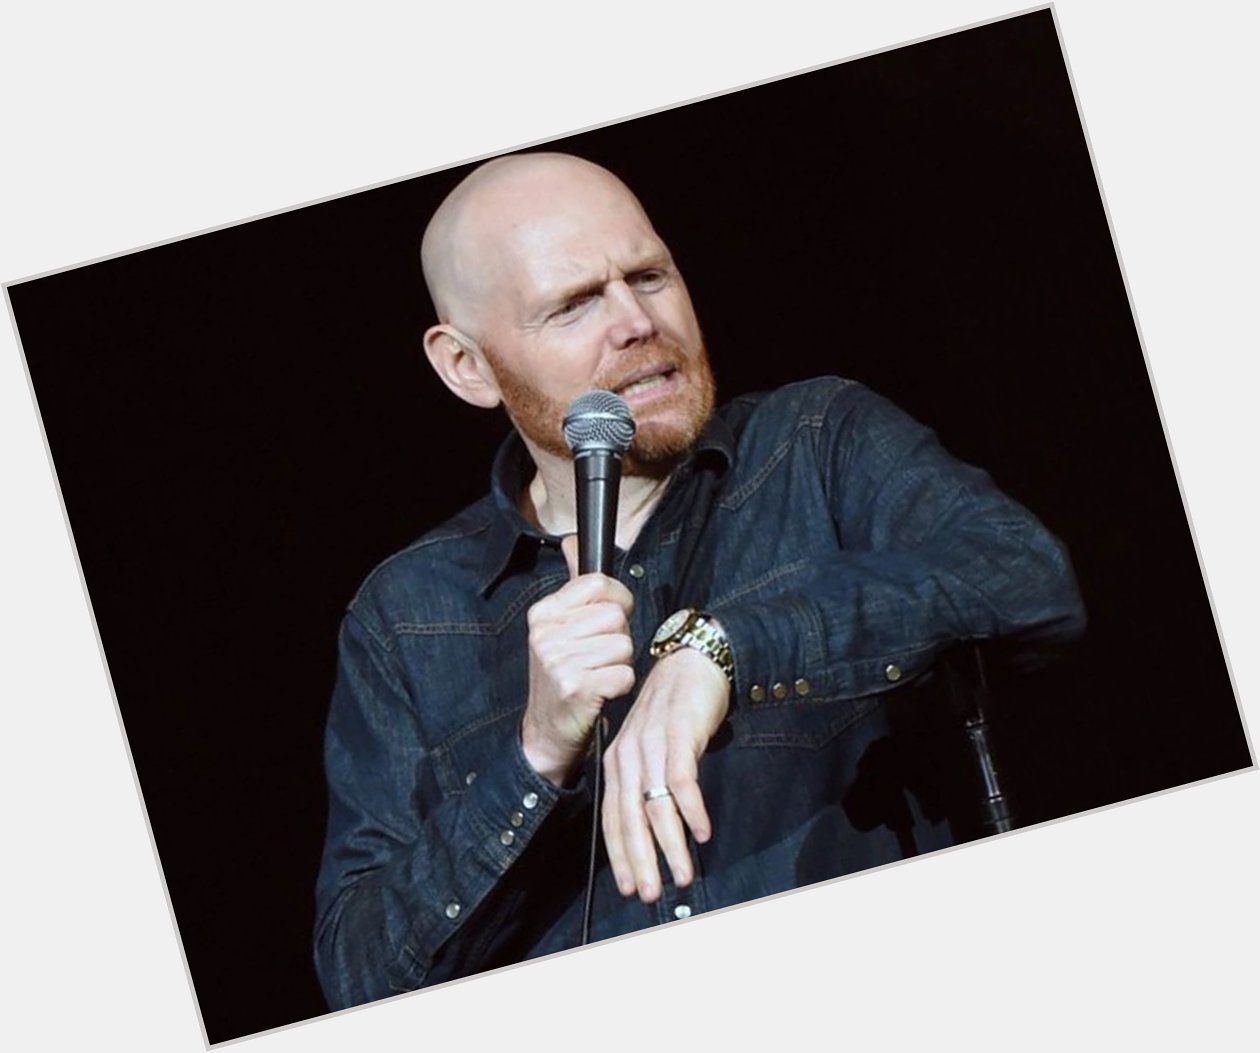 Happy birthday to me and BILL BURR 